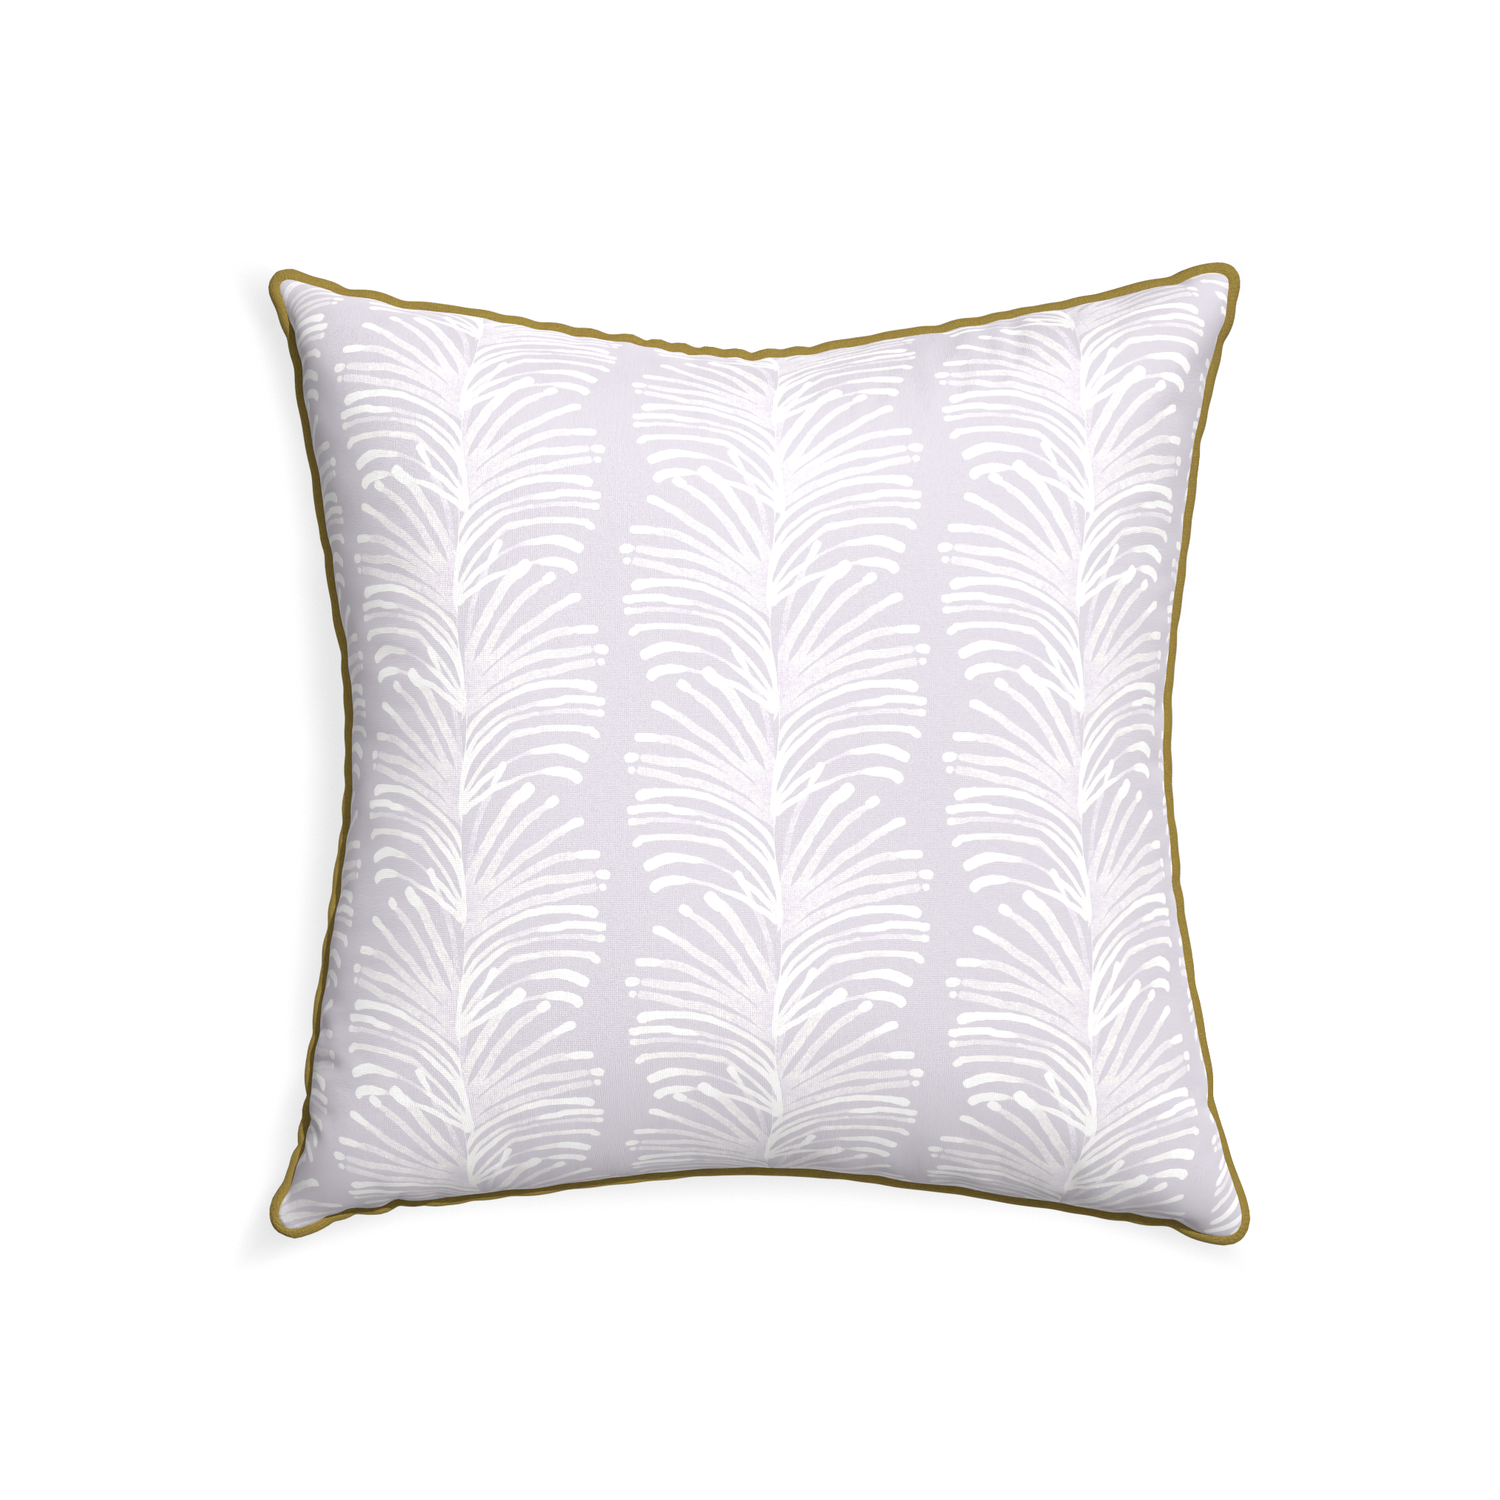 22-square emma lavender custom lavender botanical stripepillow with c piping on white background